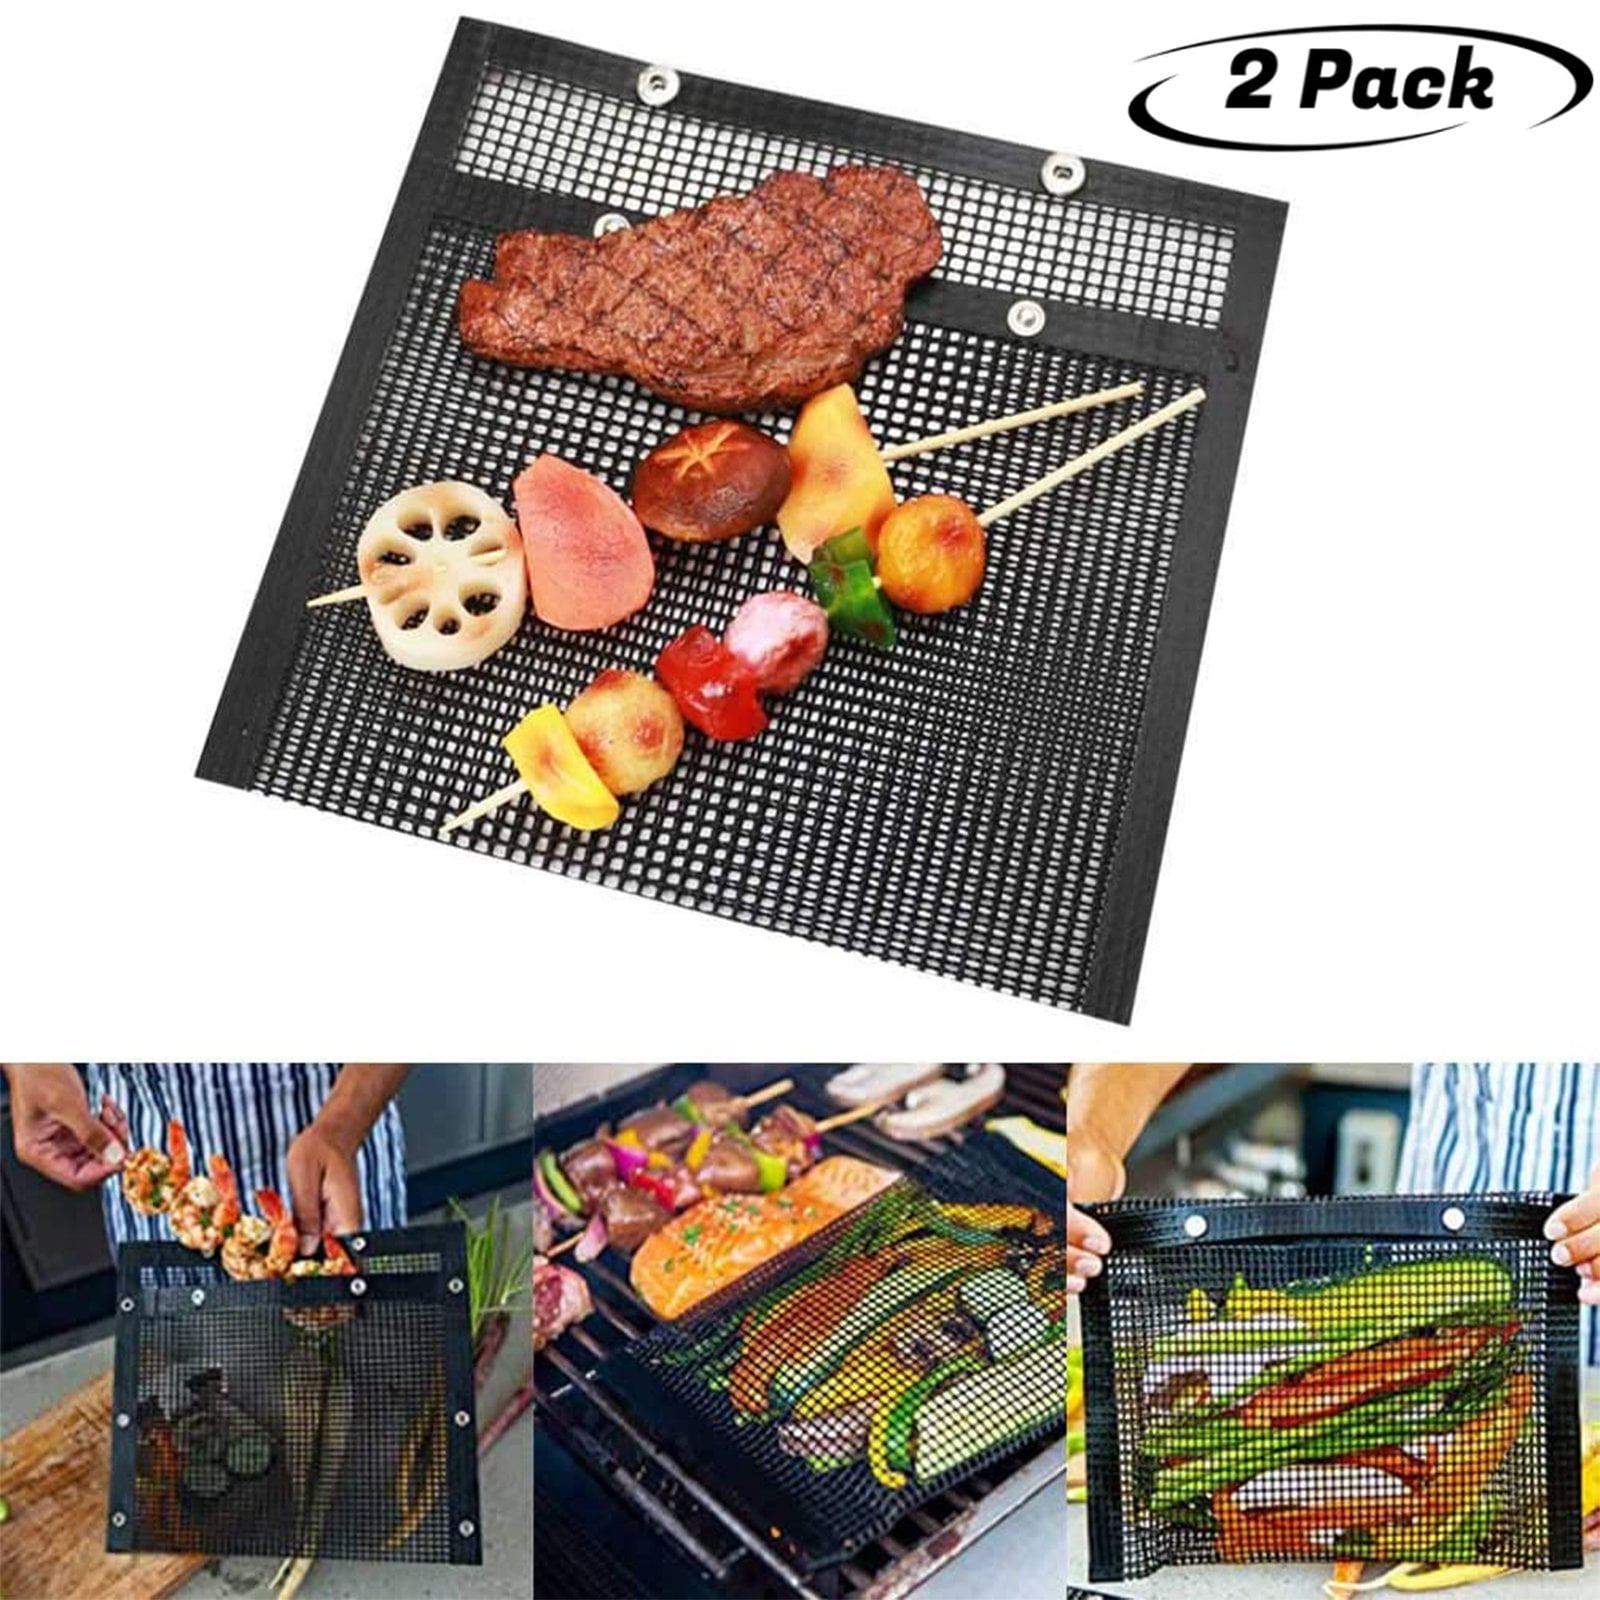 Details about   4Pcs/set BBQ Barbeque Grill Non Stick Mat Outdoor Reusable Meat Cooking Pad 